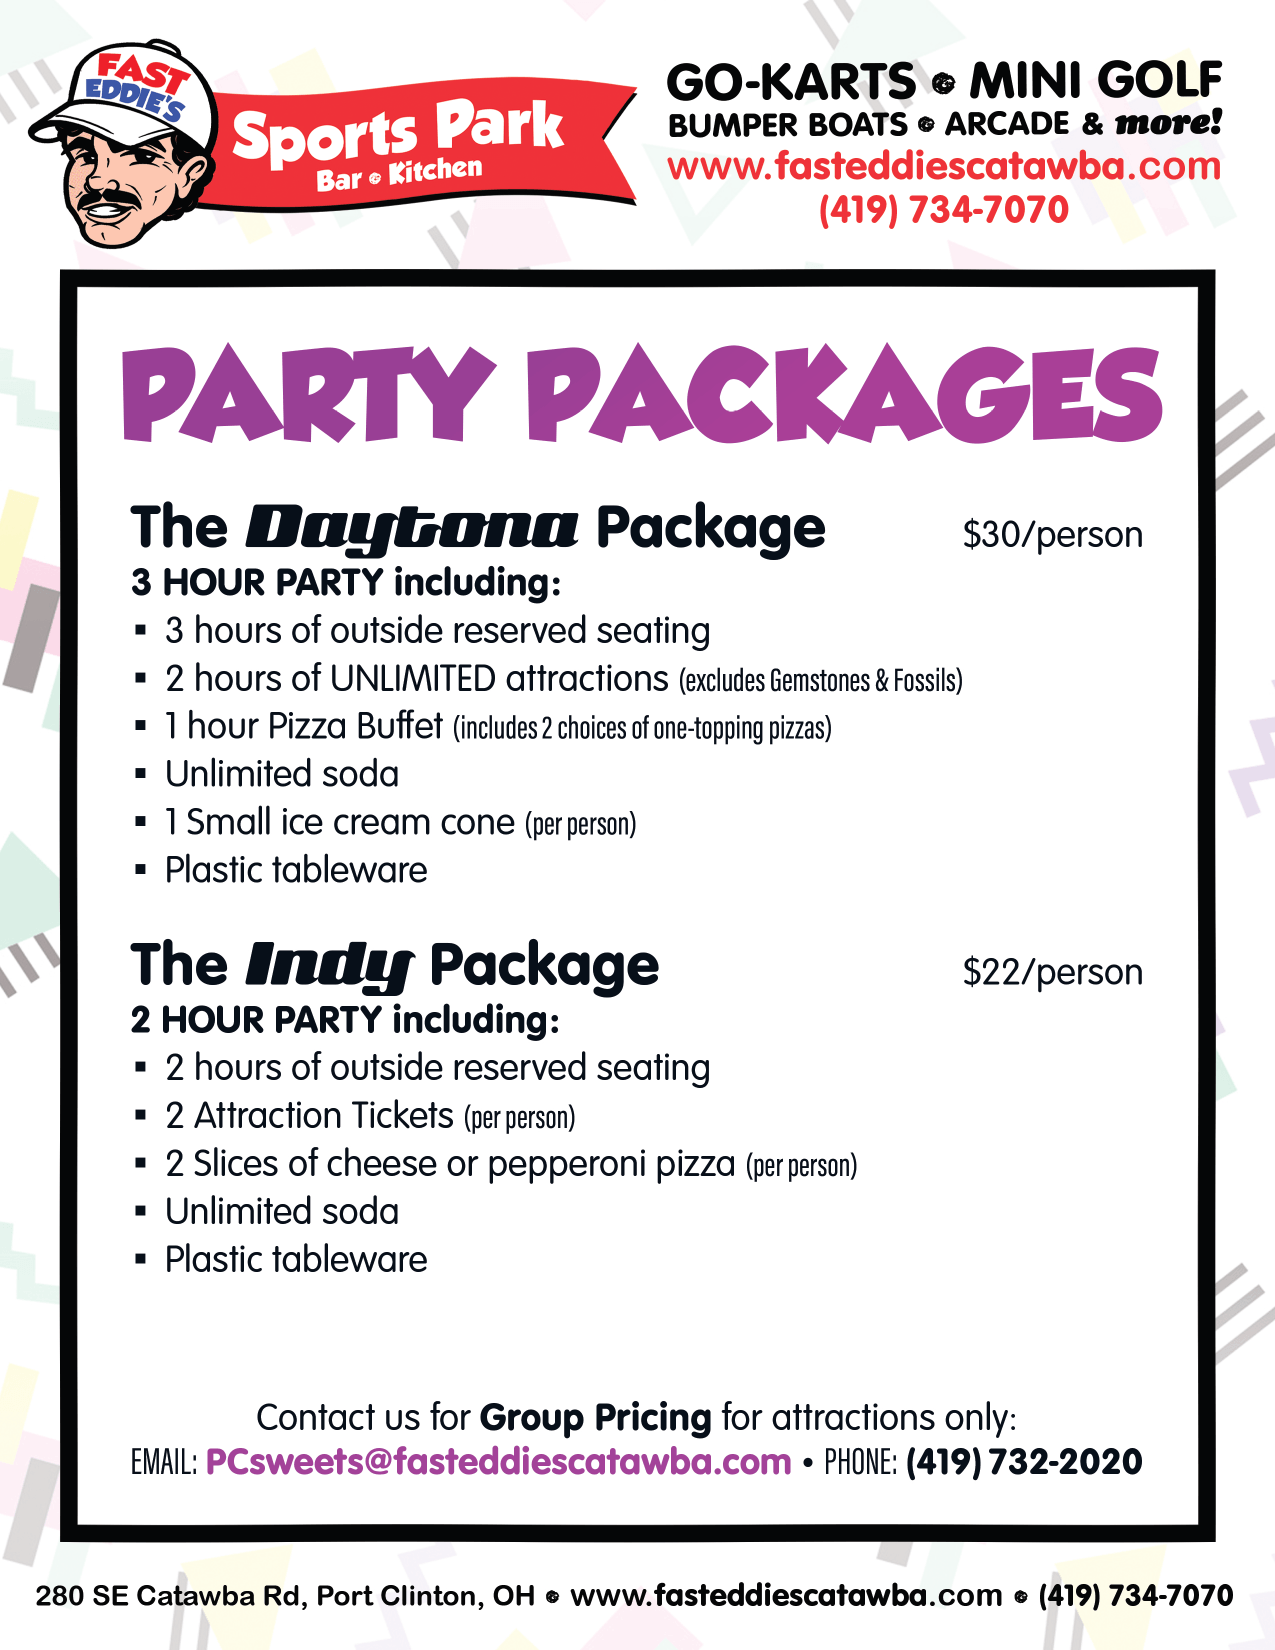 Fast Eddie's Party Packages - Pizza and attractions, Port Clinton, Ohio